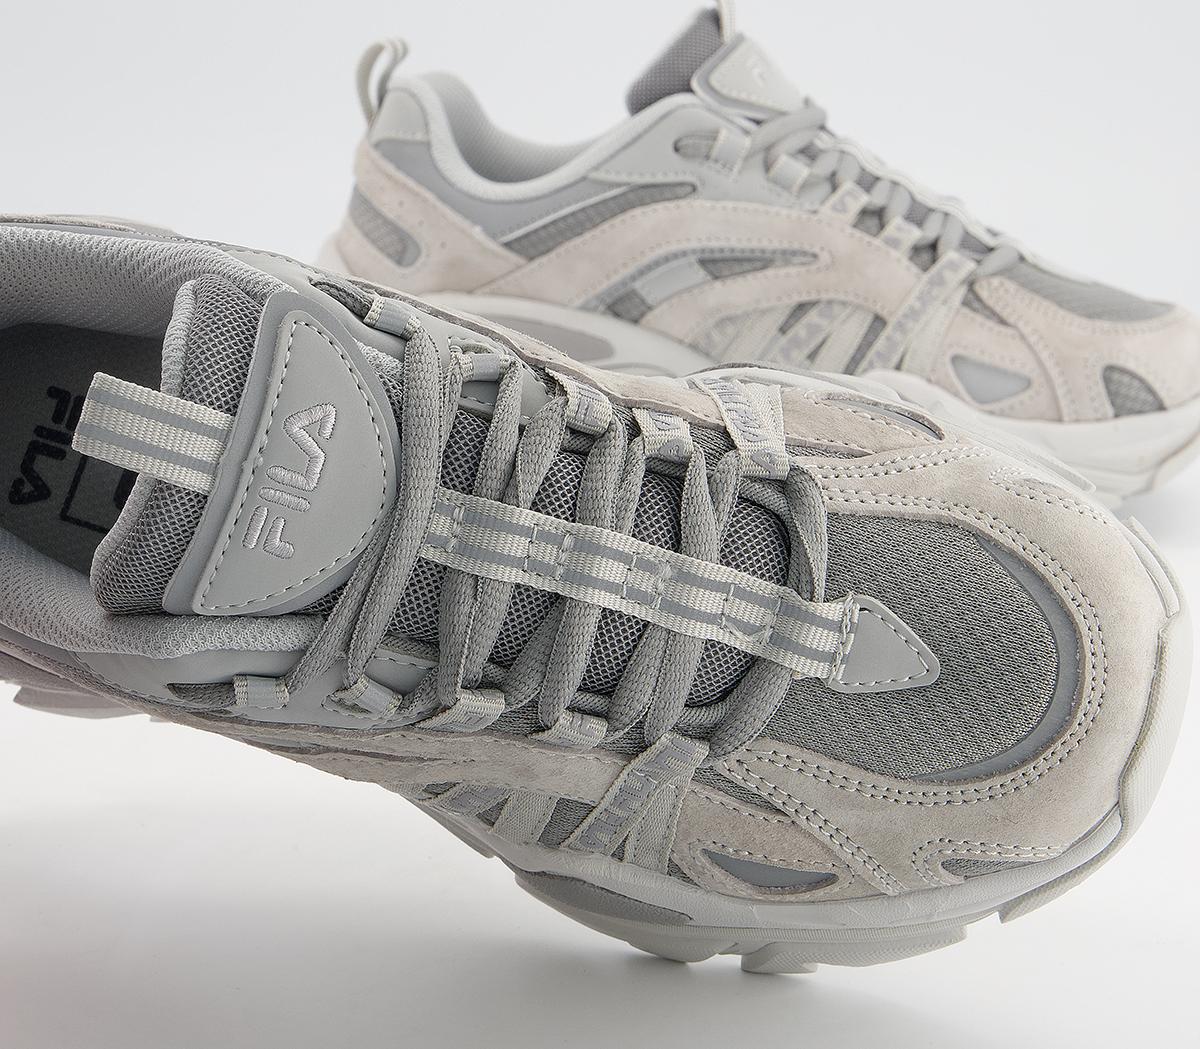 Fila Interation Trainers Grey - Hers trainers